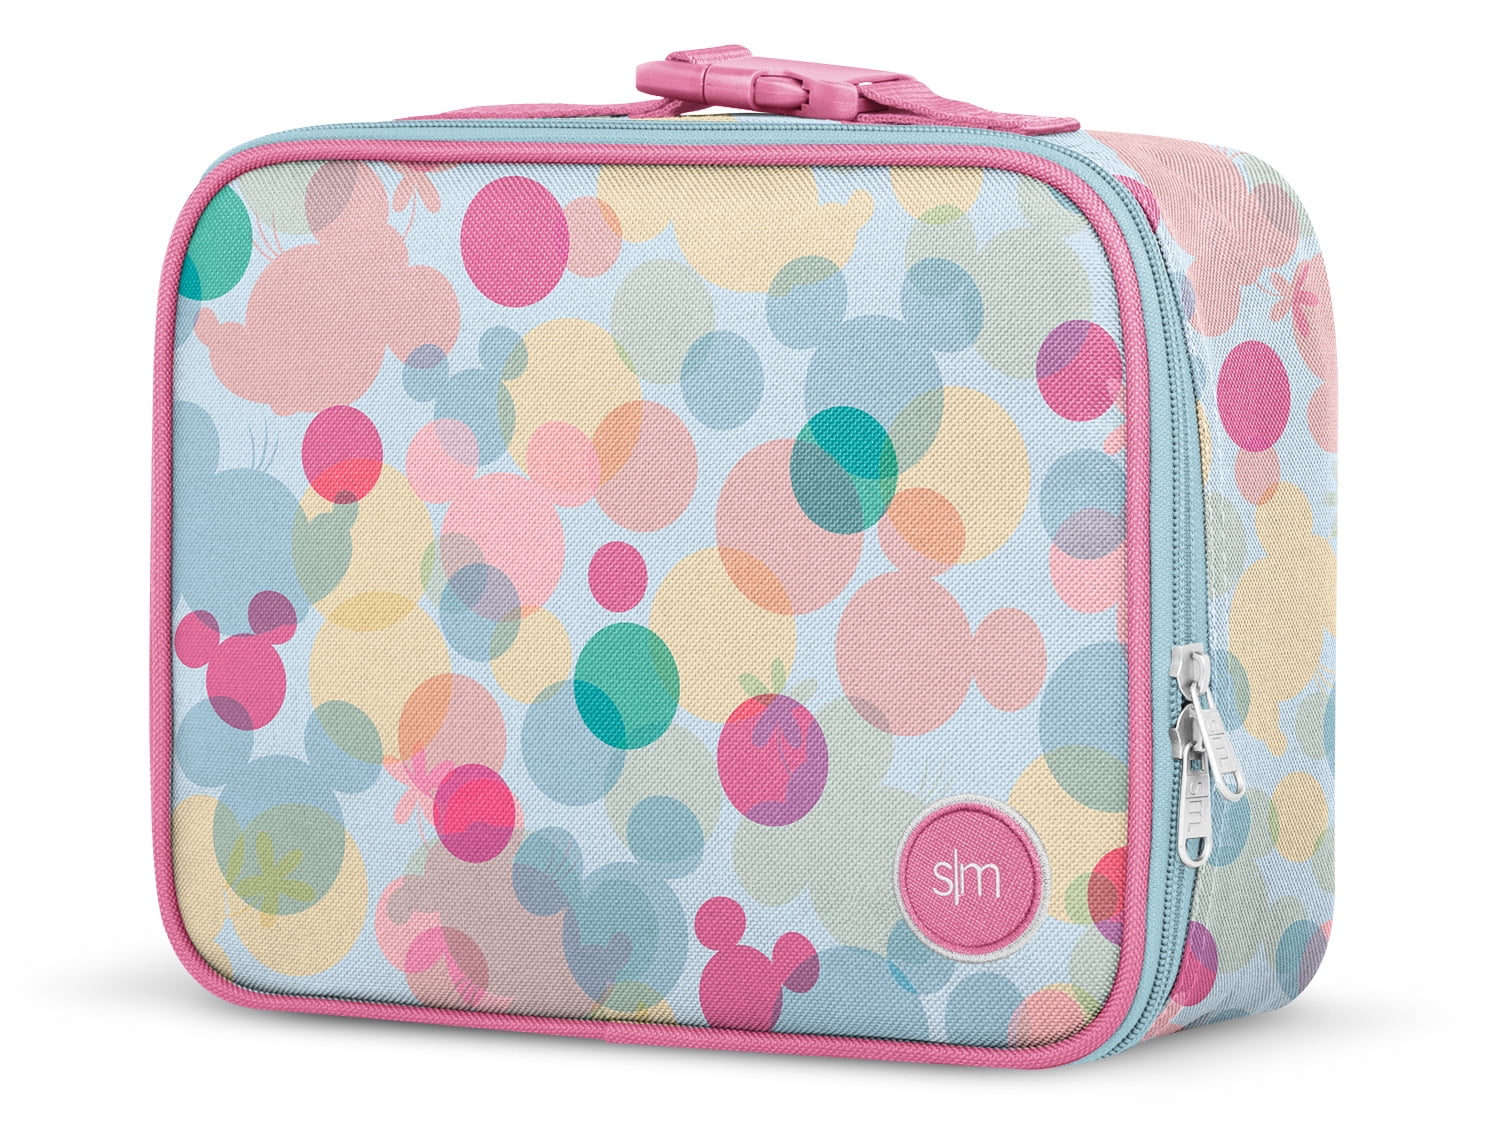 Simple Modern 4L Hadley Lunch Bag for Kids - Insulated Women's